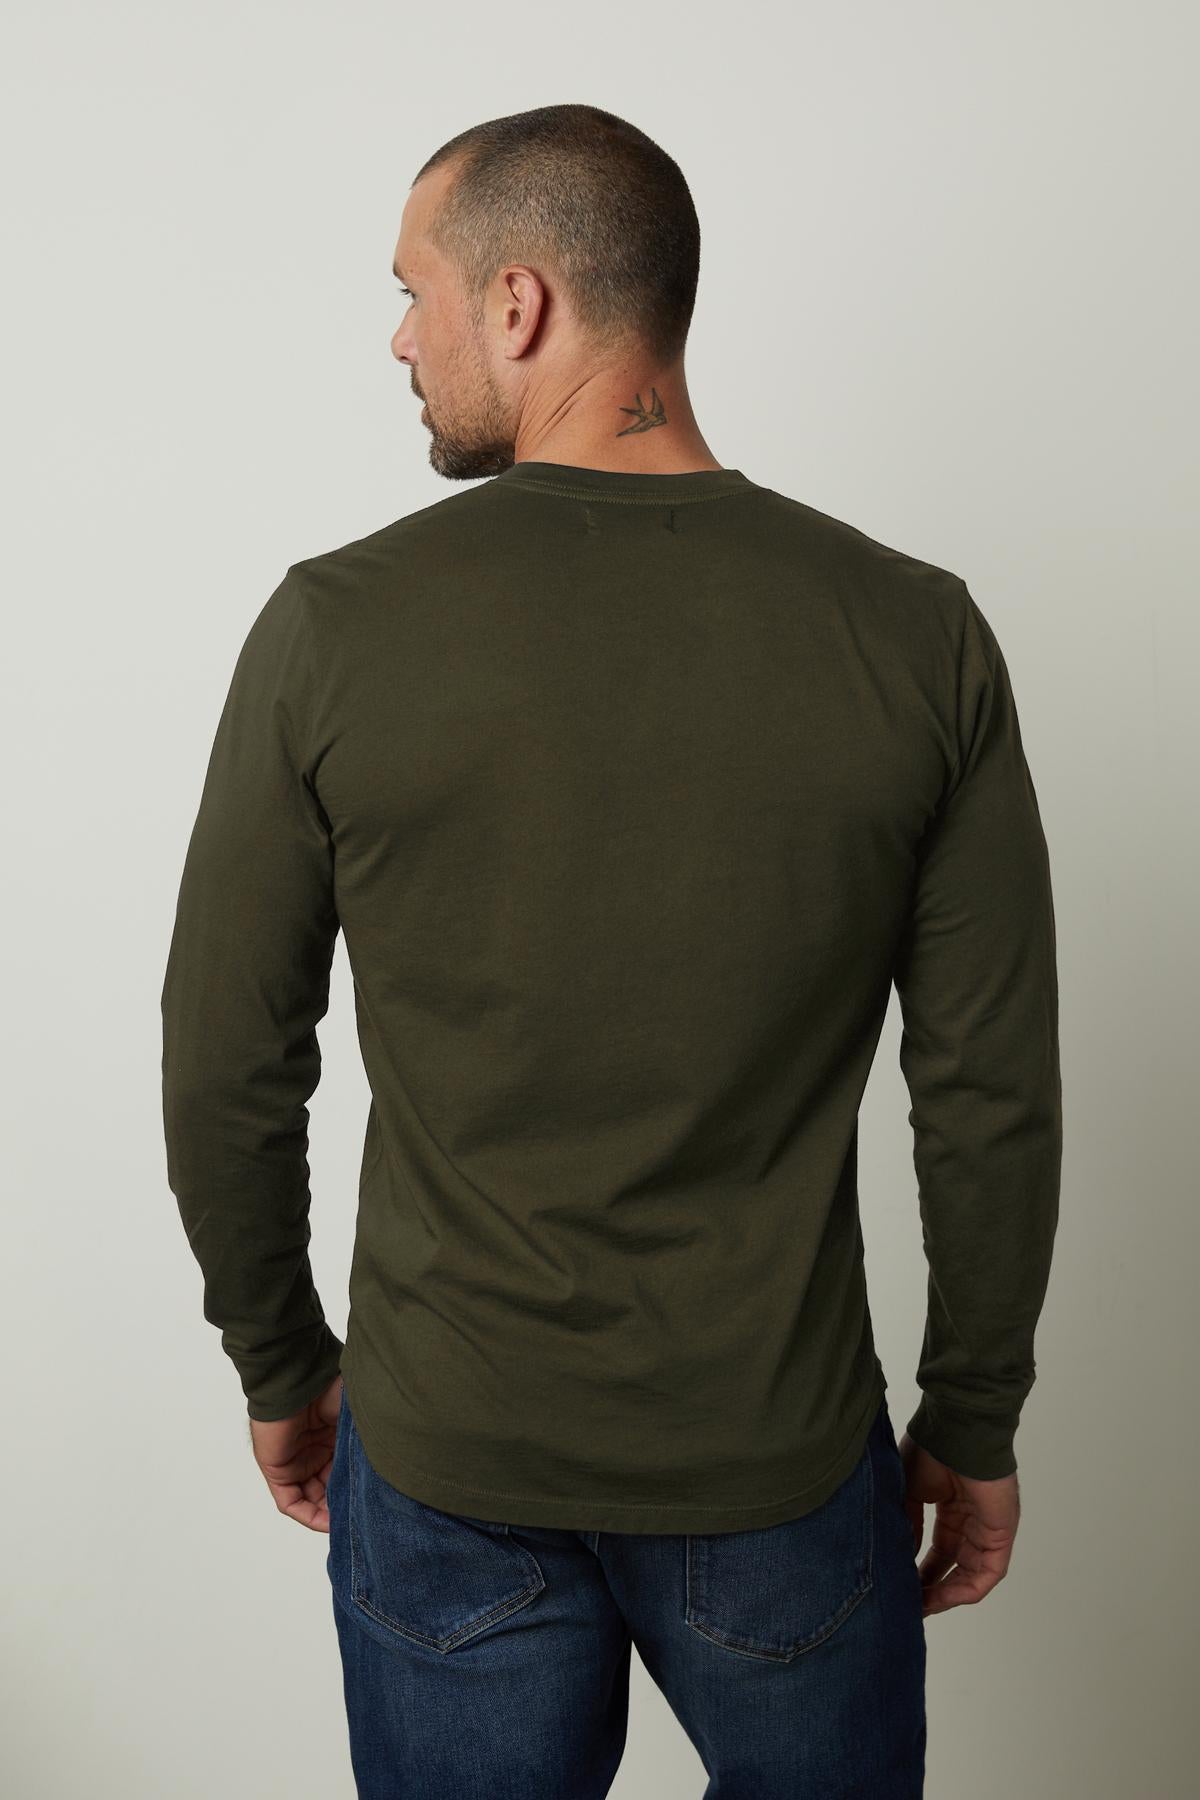 The back view of a man wearing a Velvet by Graham & Spencer lightweight green long sleeve t-shirt made of cotton fabric, called the BRADEN HENLEY.-35547527119041